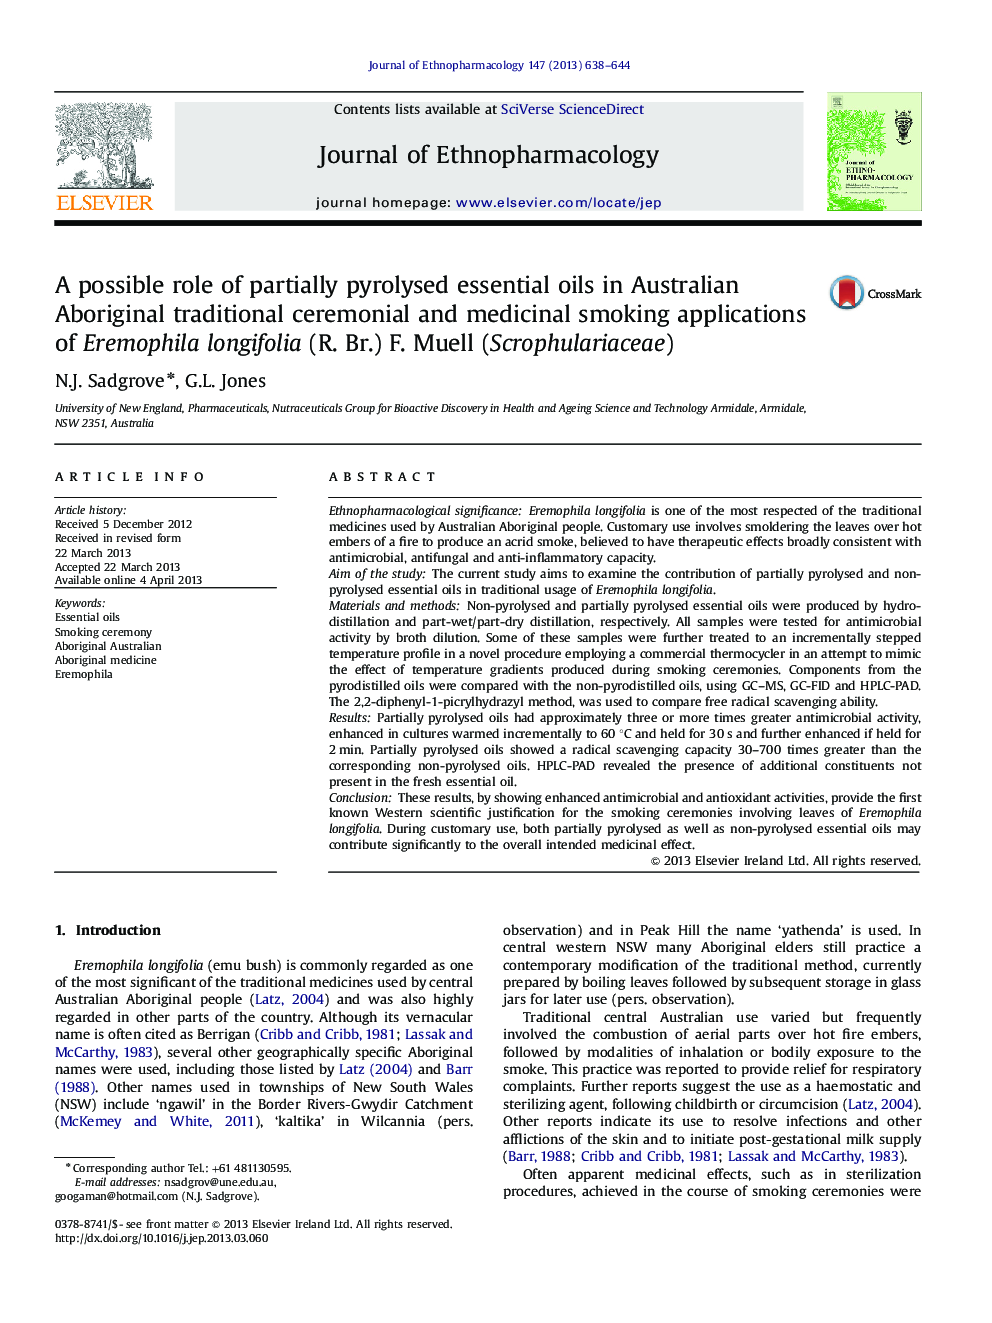 A possible role of partially pyrolysed essential oils in Australian Aboriginal traditional ceremonial and medicinal smoking applications of Eremophila longifolia (R. Br.) F. Muell (Scrophulariaceae)